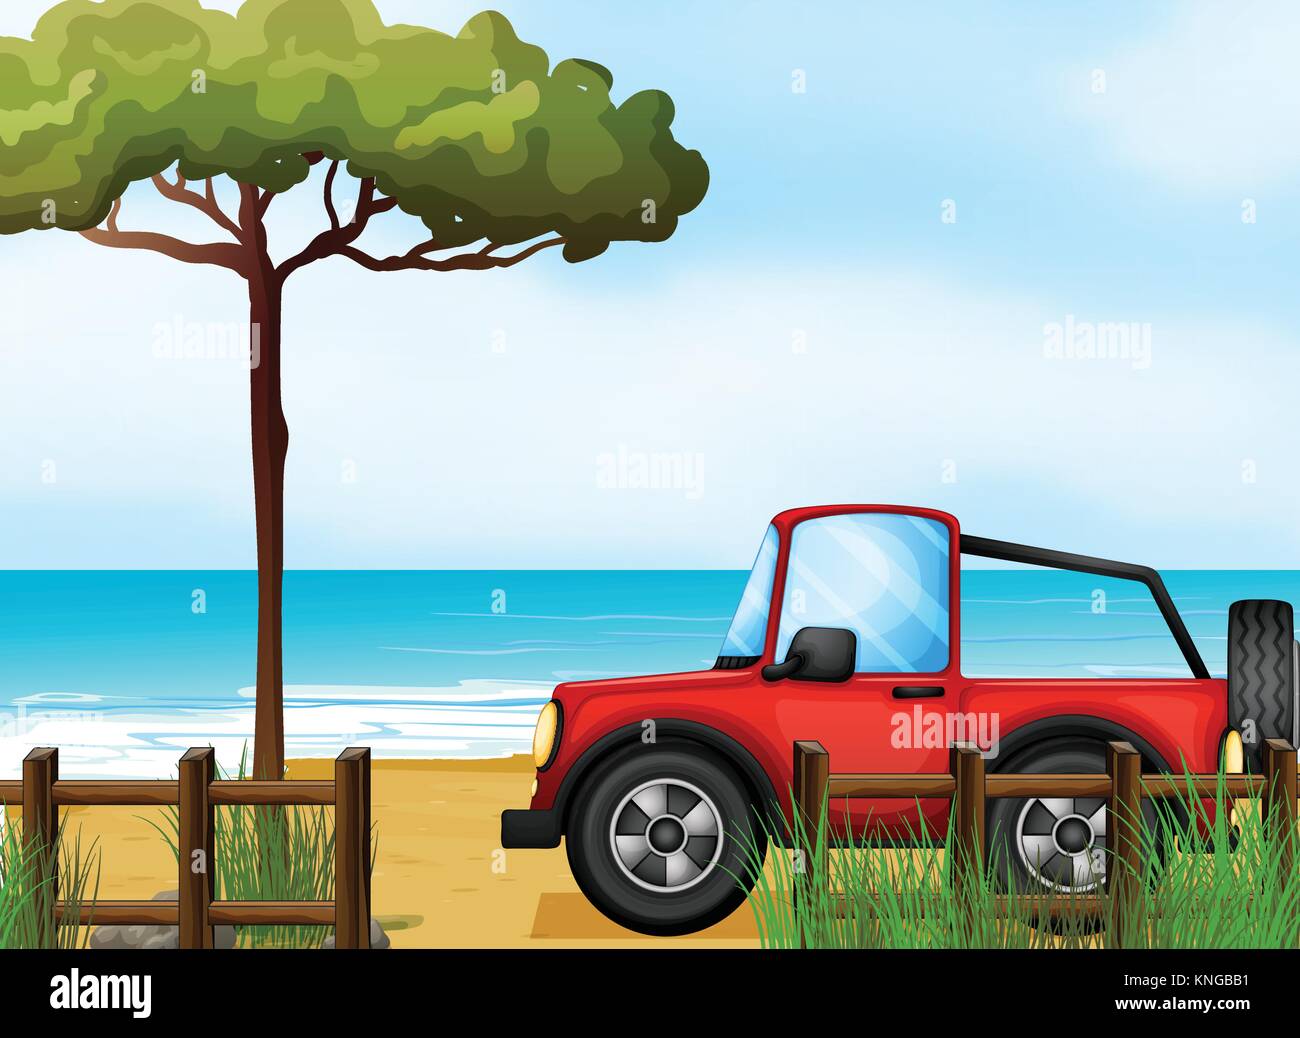 Illustration of a red jeepney at the beach Stock Vector